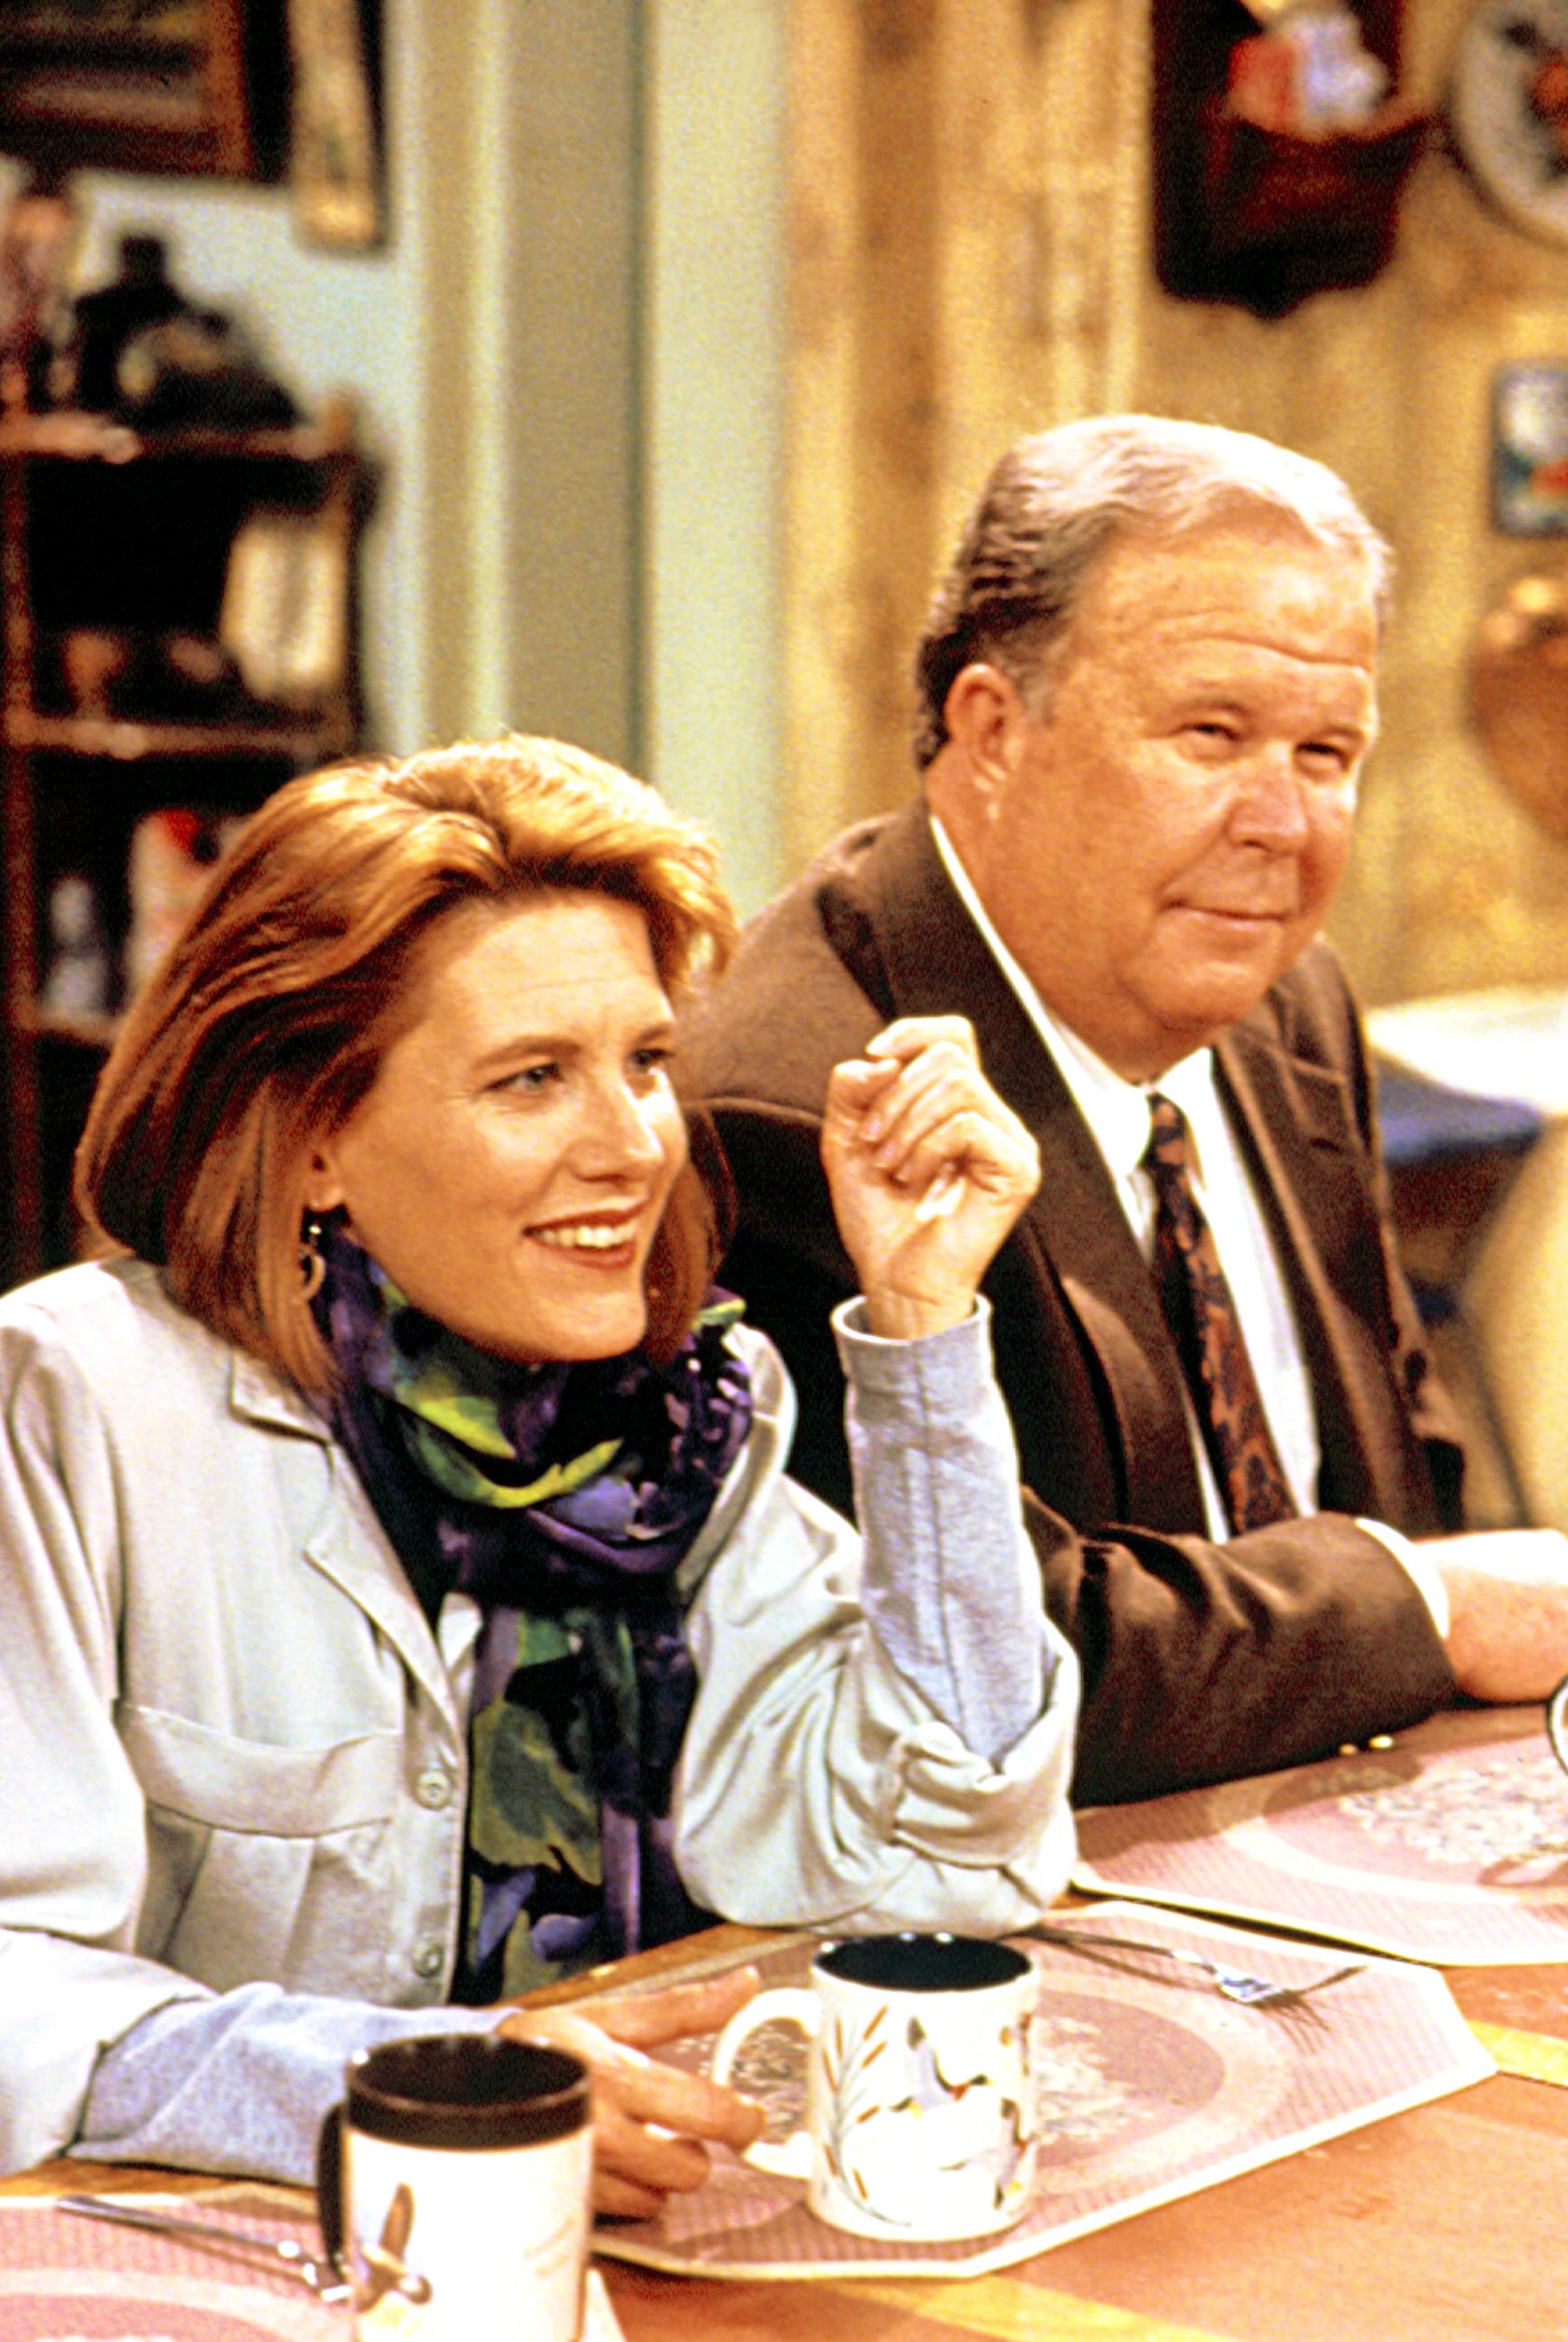 ROSEANNE, Natalie West, Ned Beatty, season 3, episode 'The Courtship of Eddie, Dan's Father' aired 1/8/91, 1988-97, (c)Carsey-Werner Company